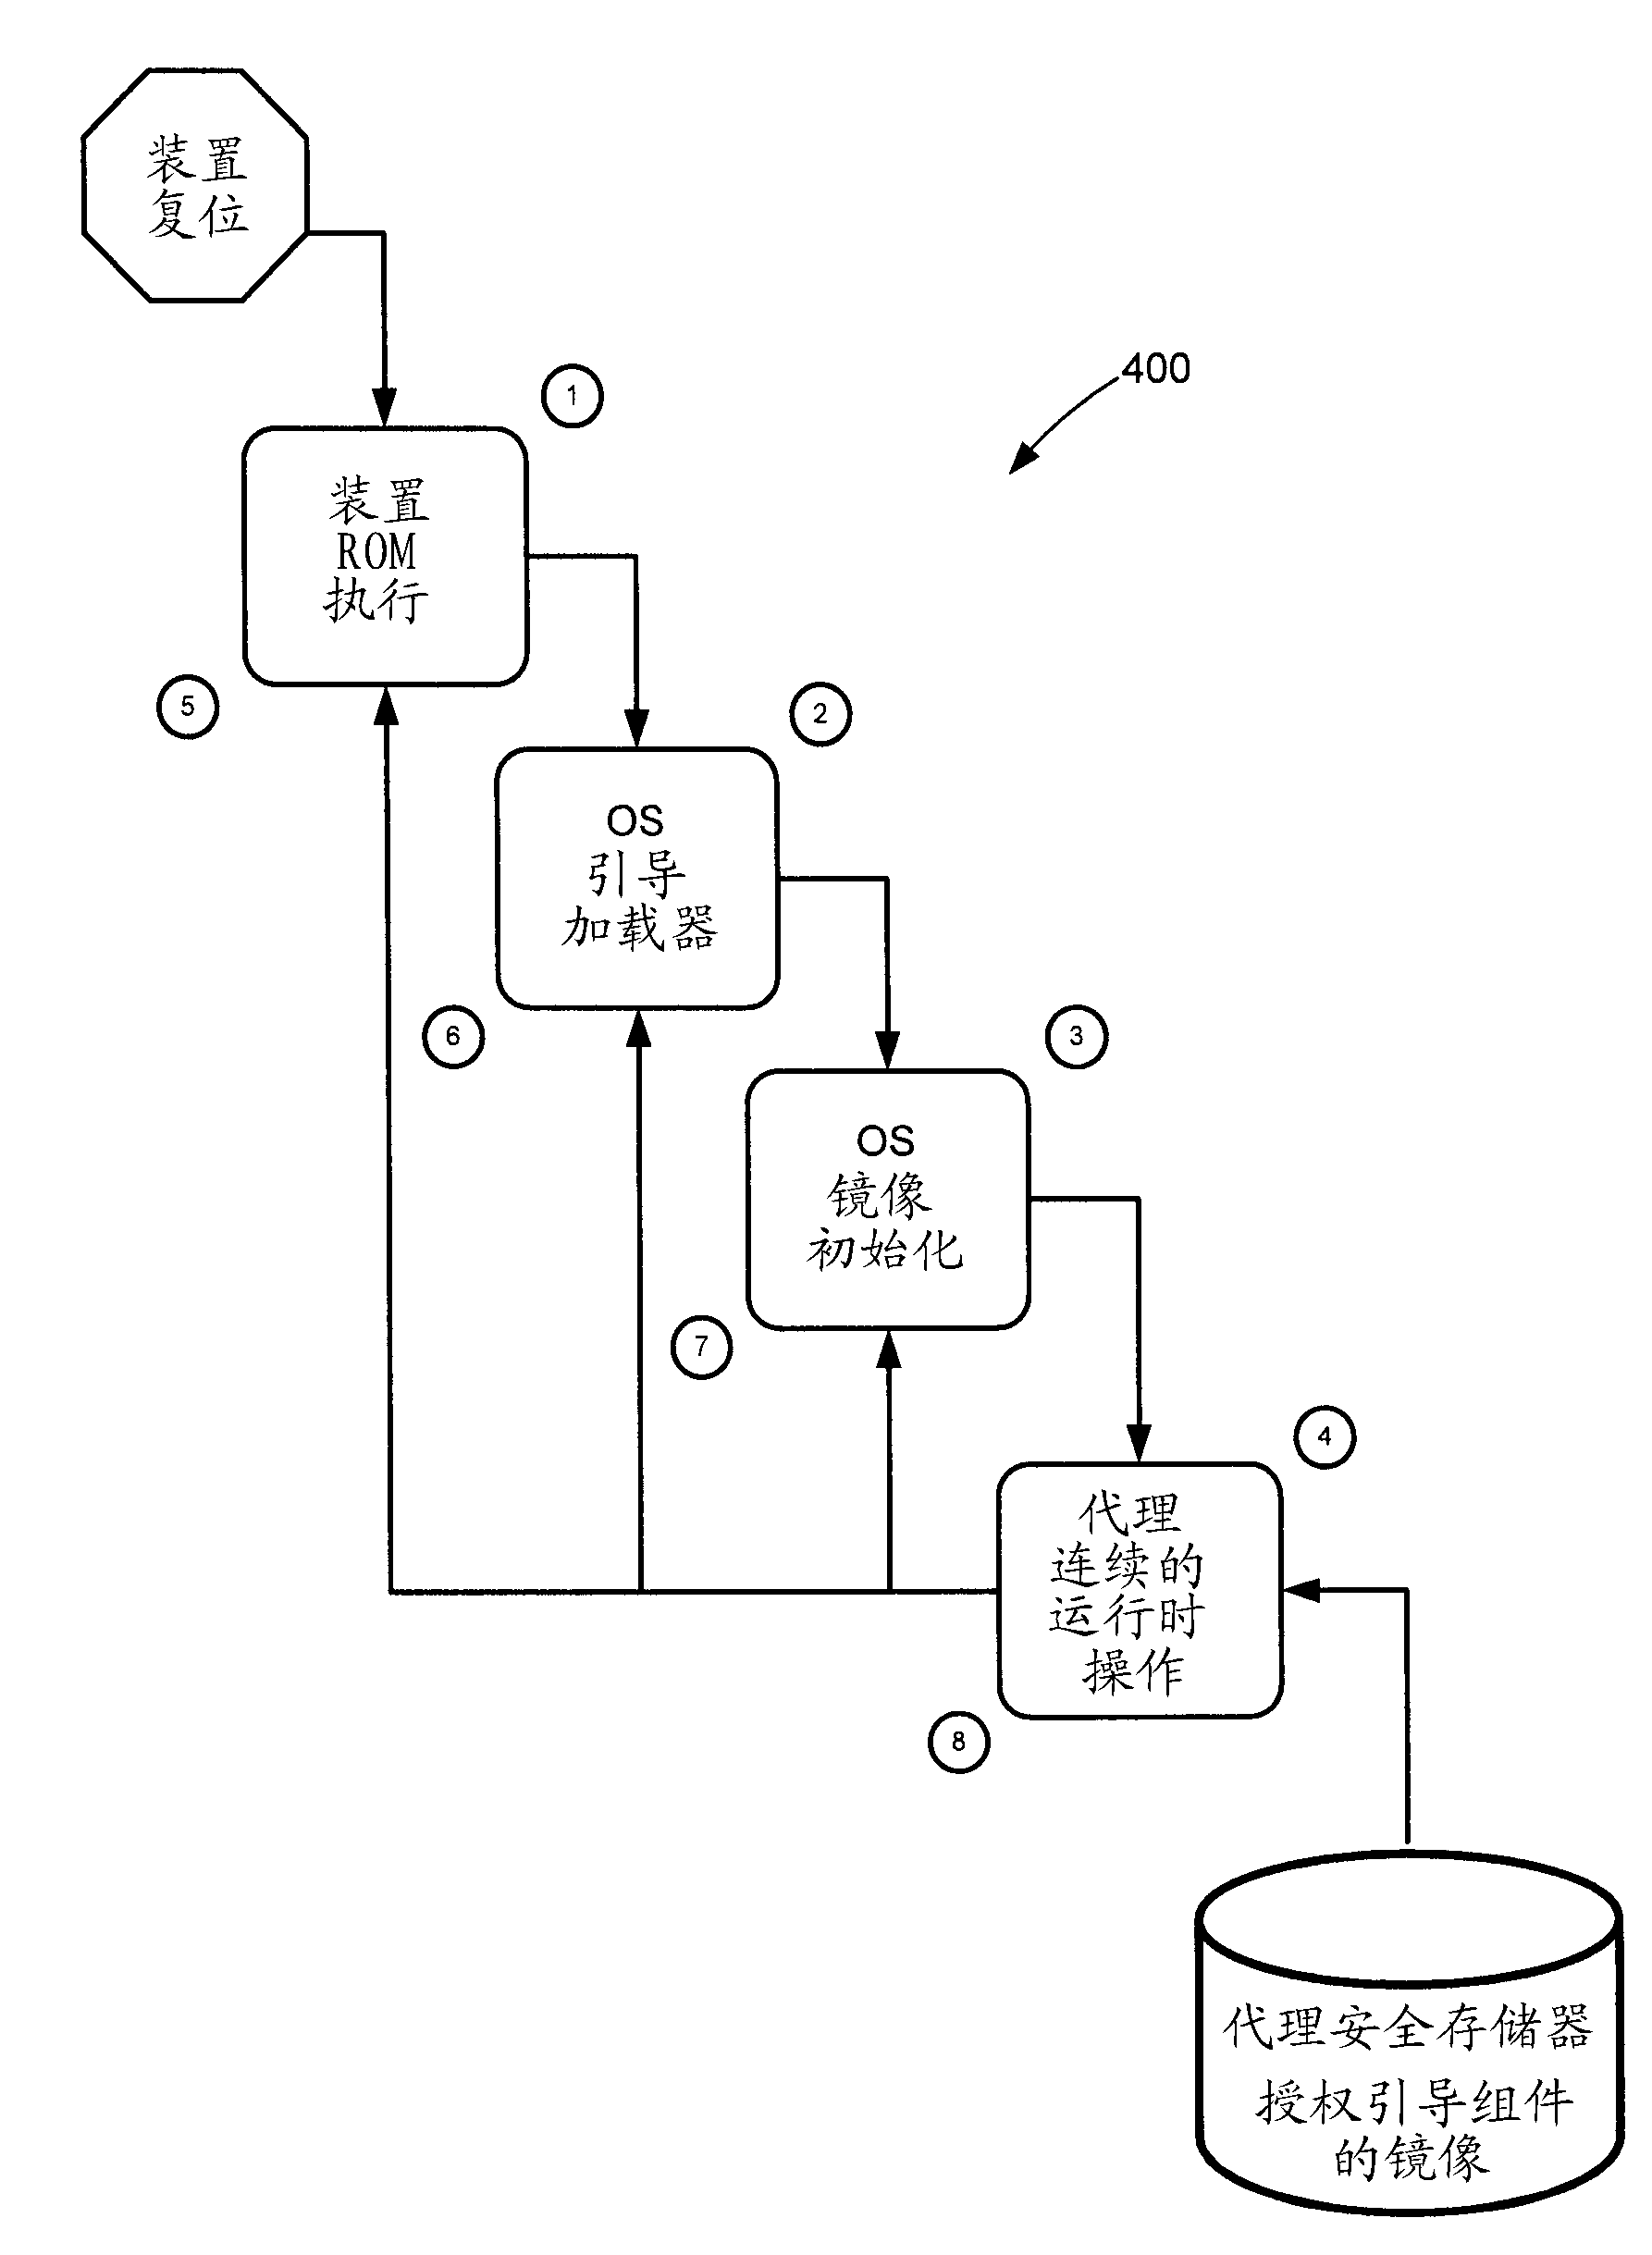 Method and system for preventing and detecting security threats